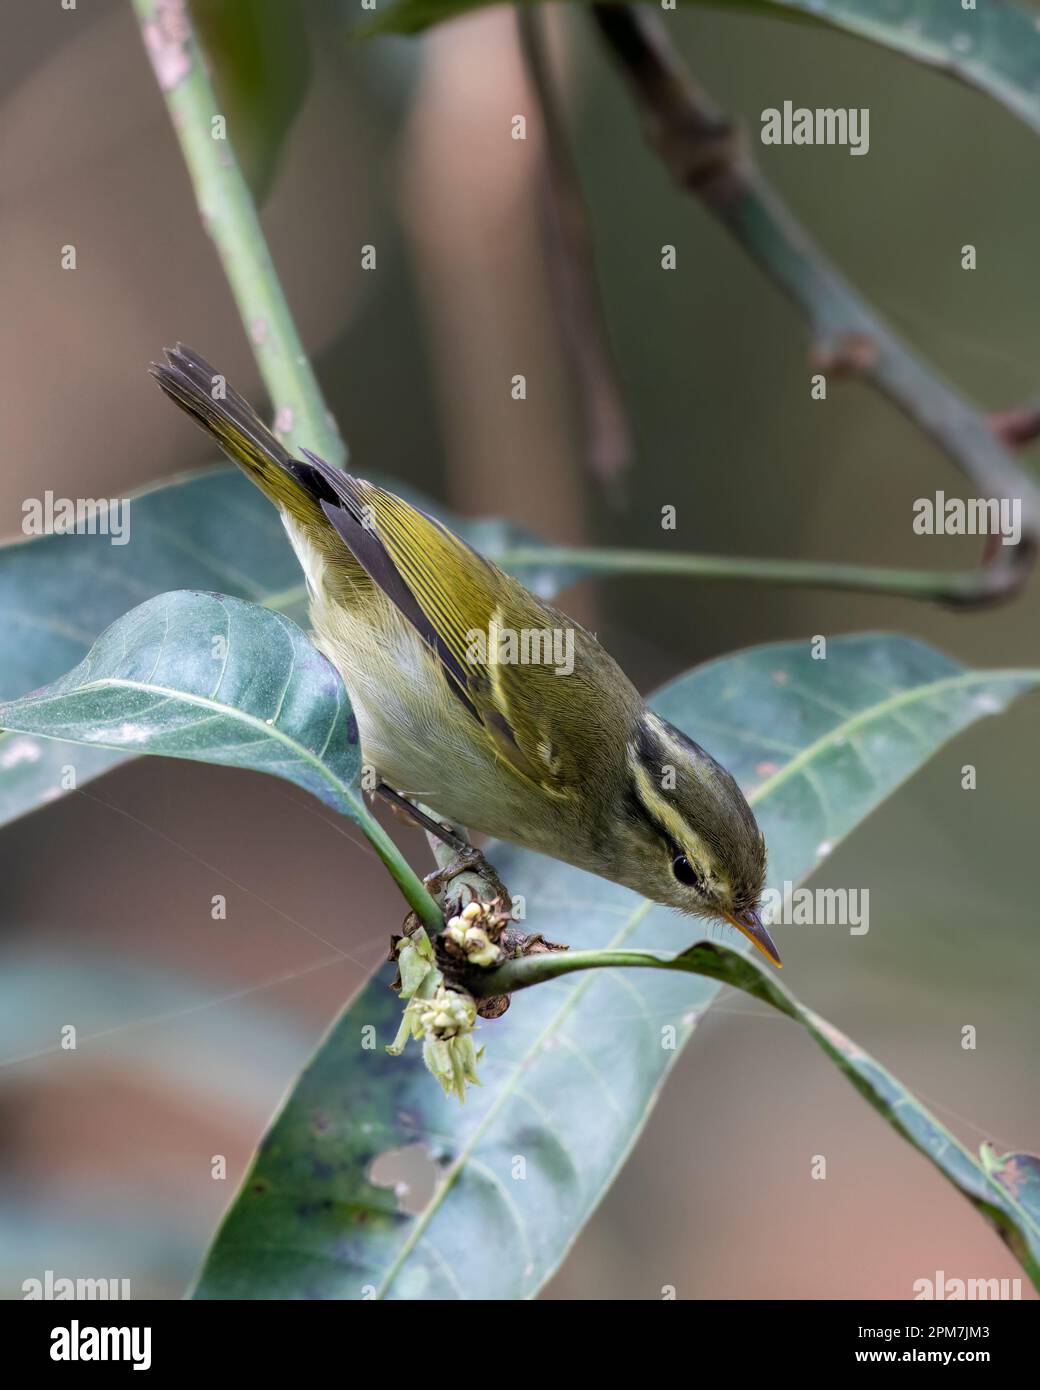 Ashy-throated warbler (Phylloscopus maculipennis), a species of leaf warbler, observed in Latpanchar in West Bengal, India Stock Photo